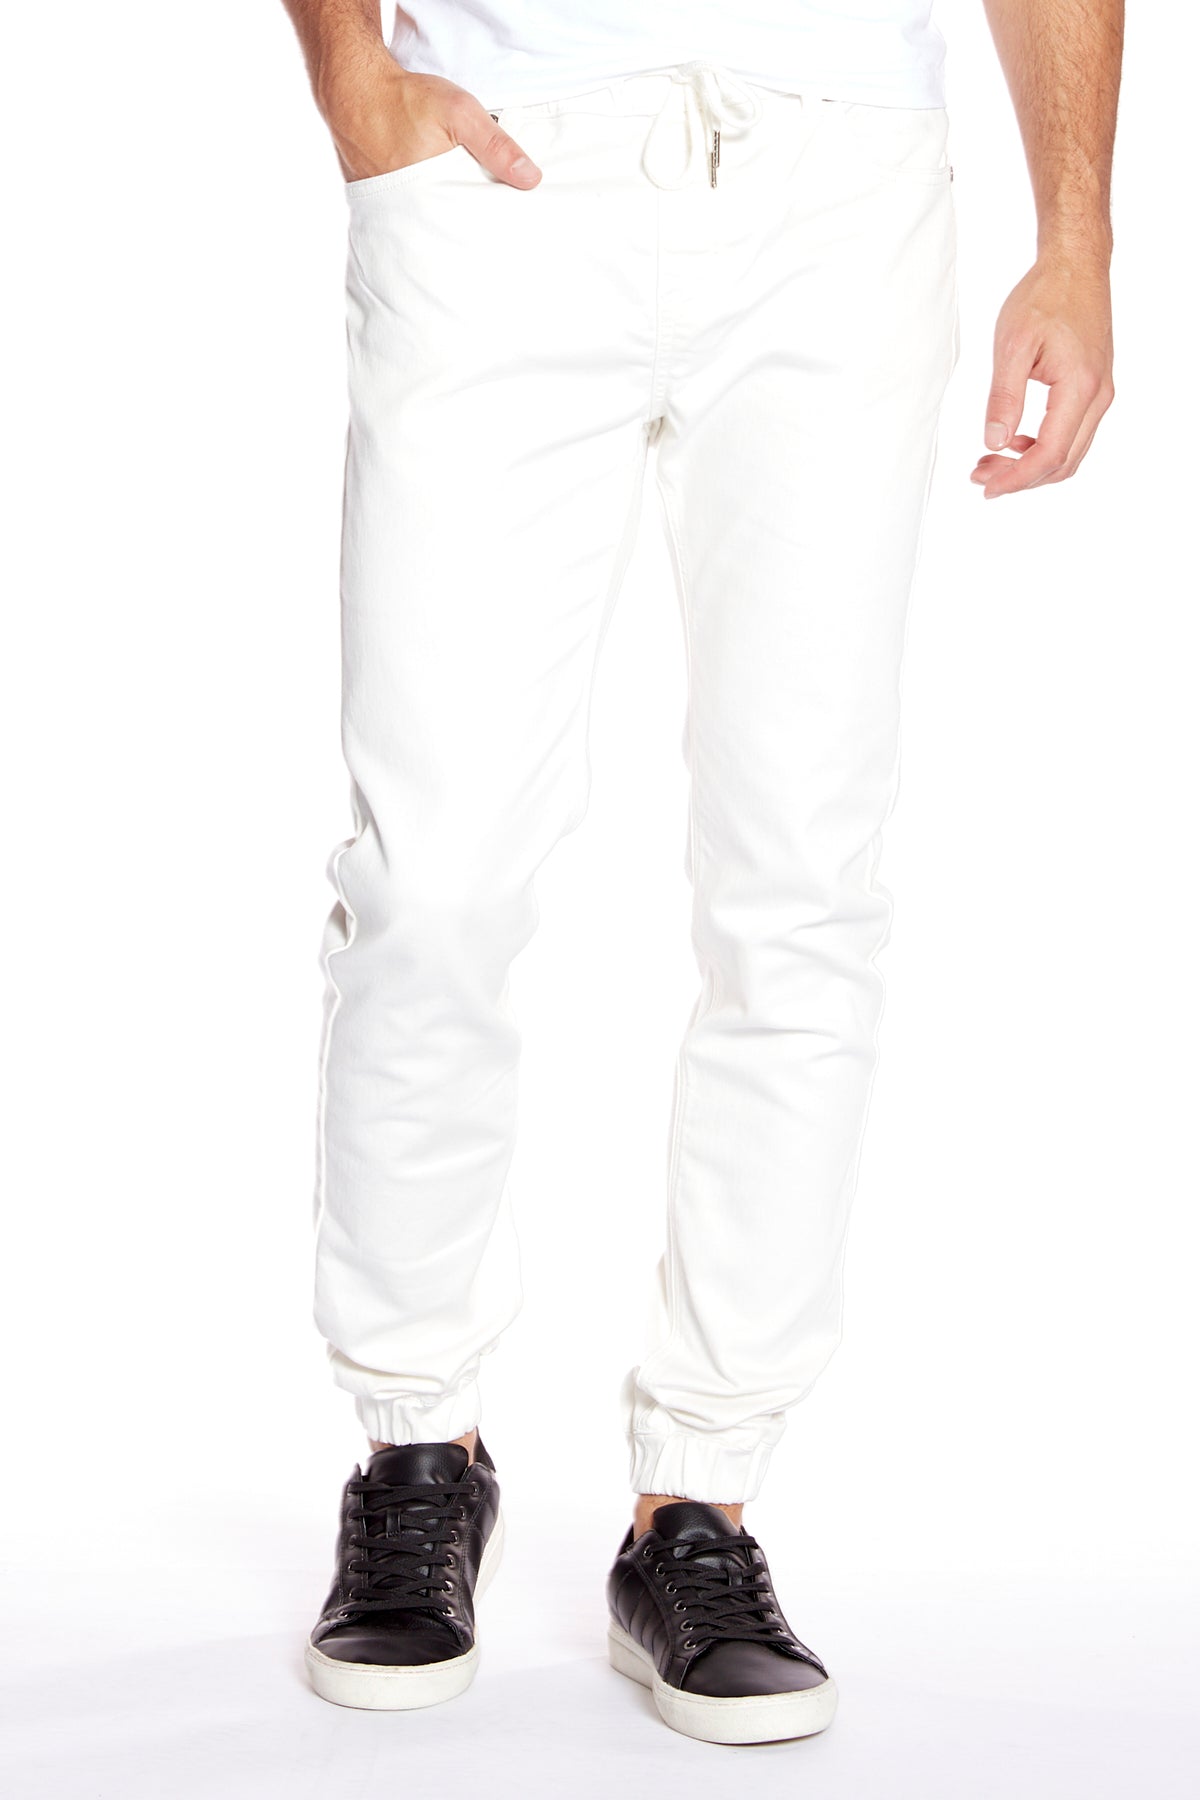 JAGGER - 5 Pocket Soft French Terry Classic Jogger - Off White - DENIM SOCIETY™